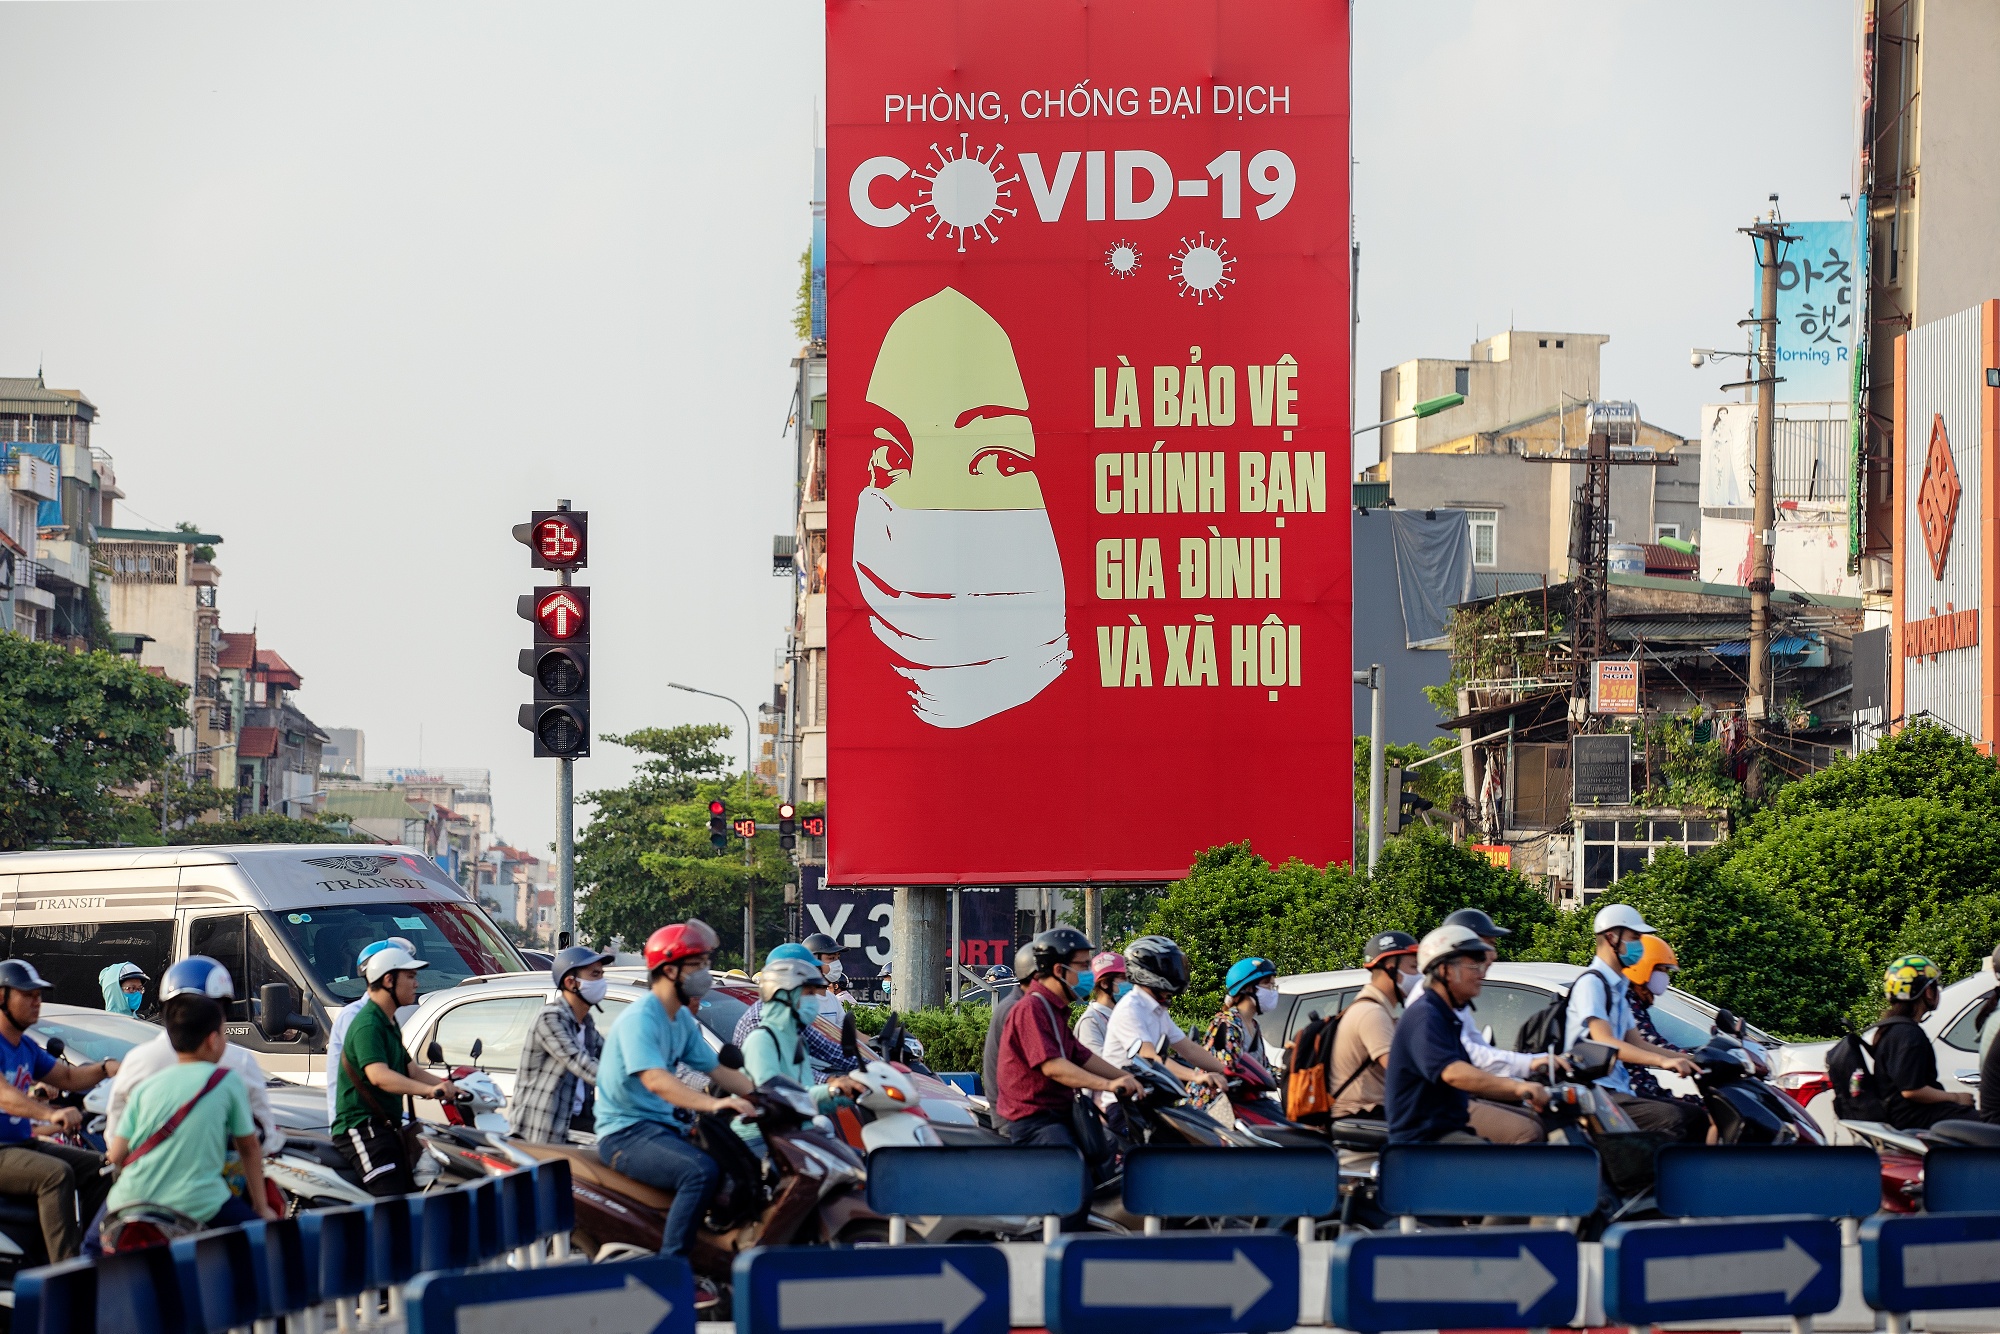 Motorcyclists ride past a public information hoarding about coronavirus displayed in Hanoi, Vietnam.